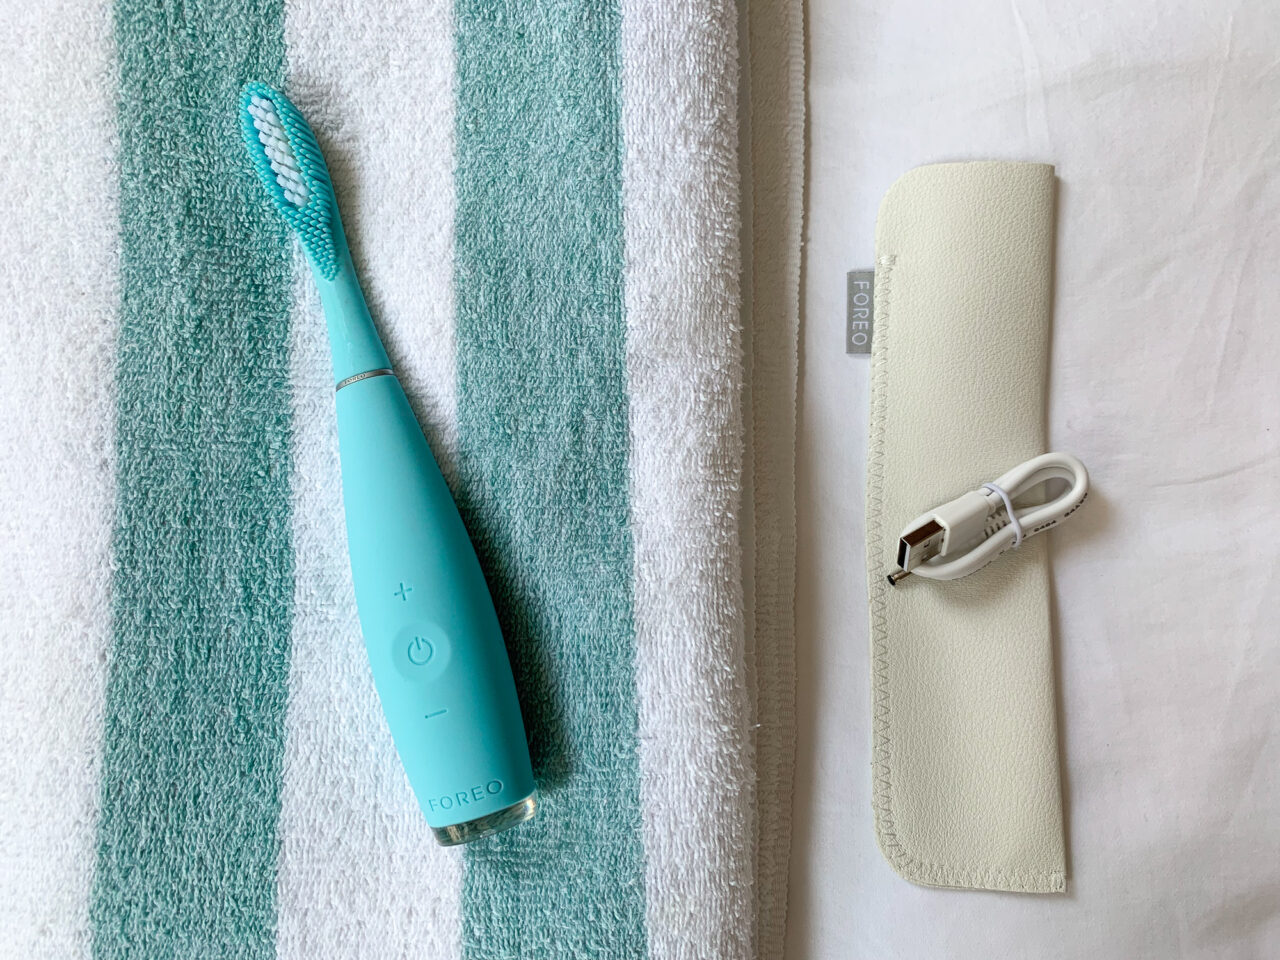 Best Electric Toothbrush 2019